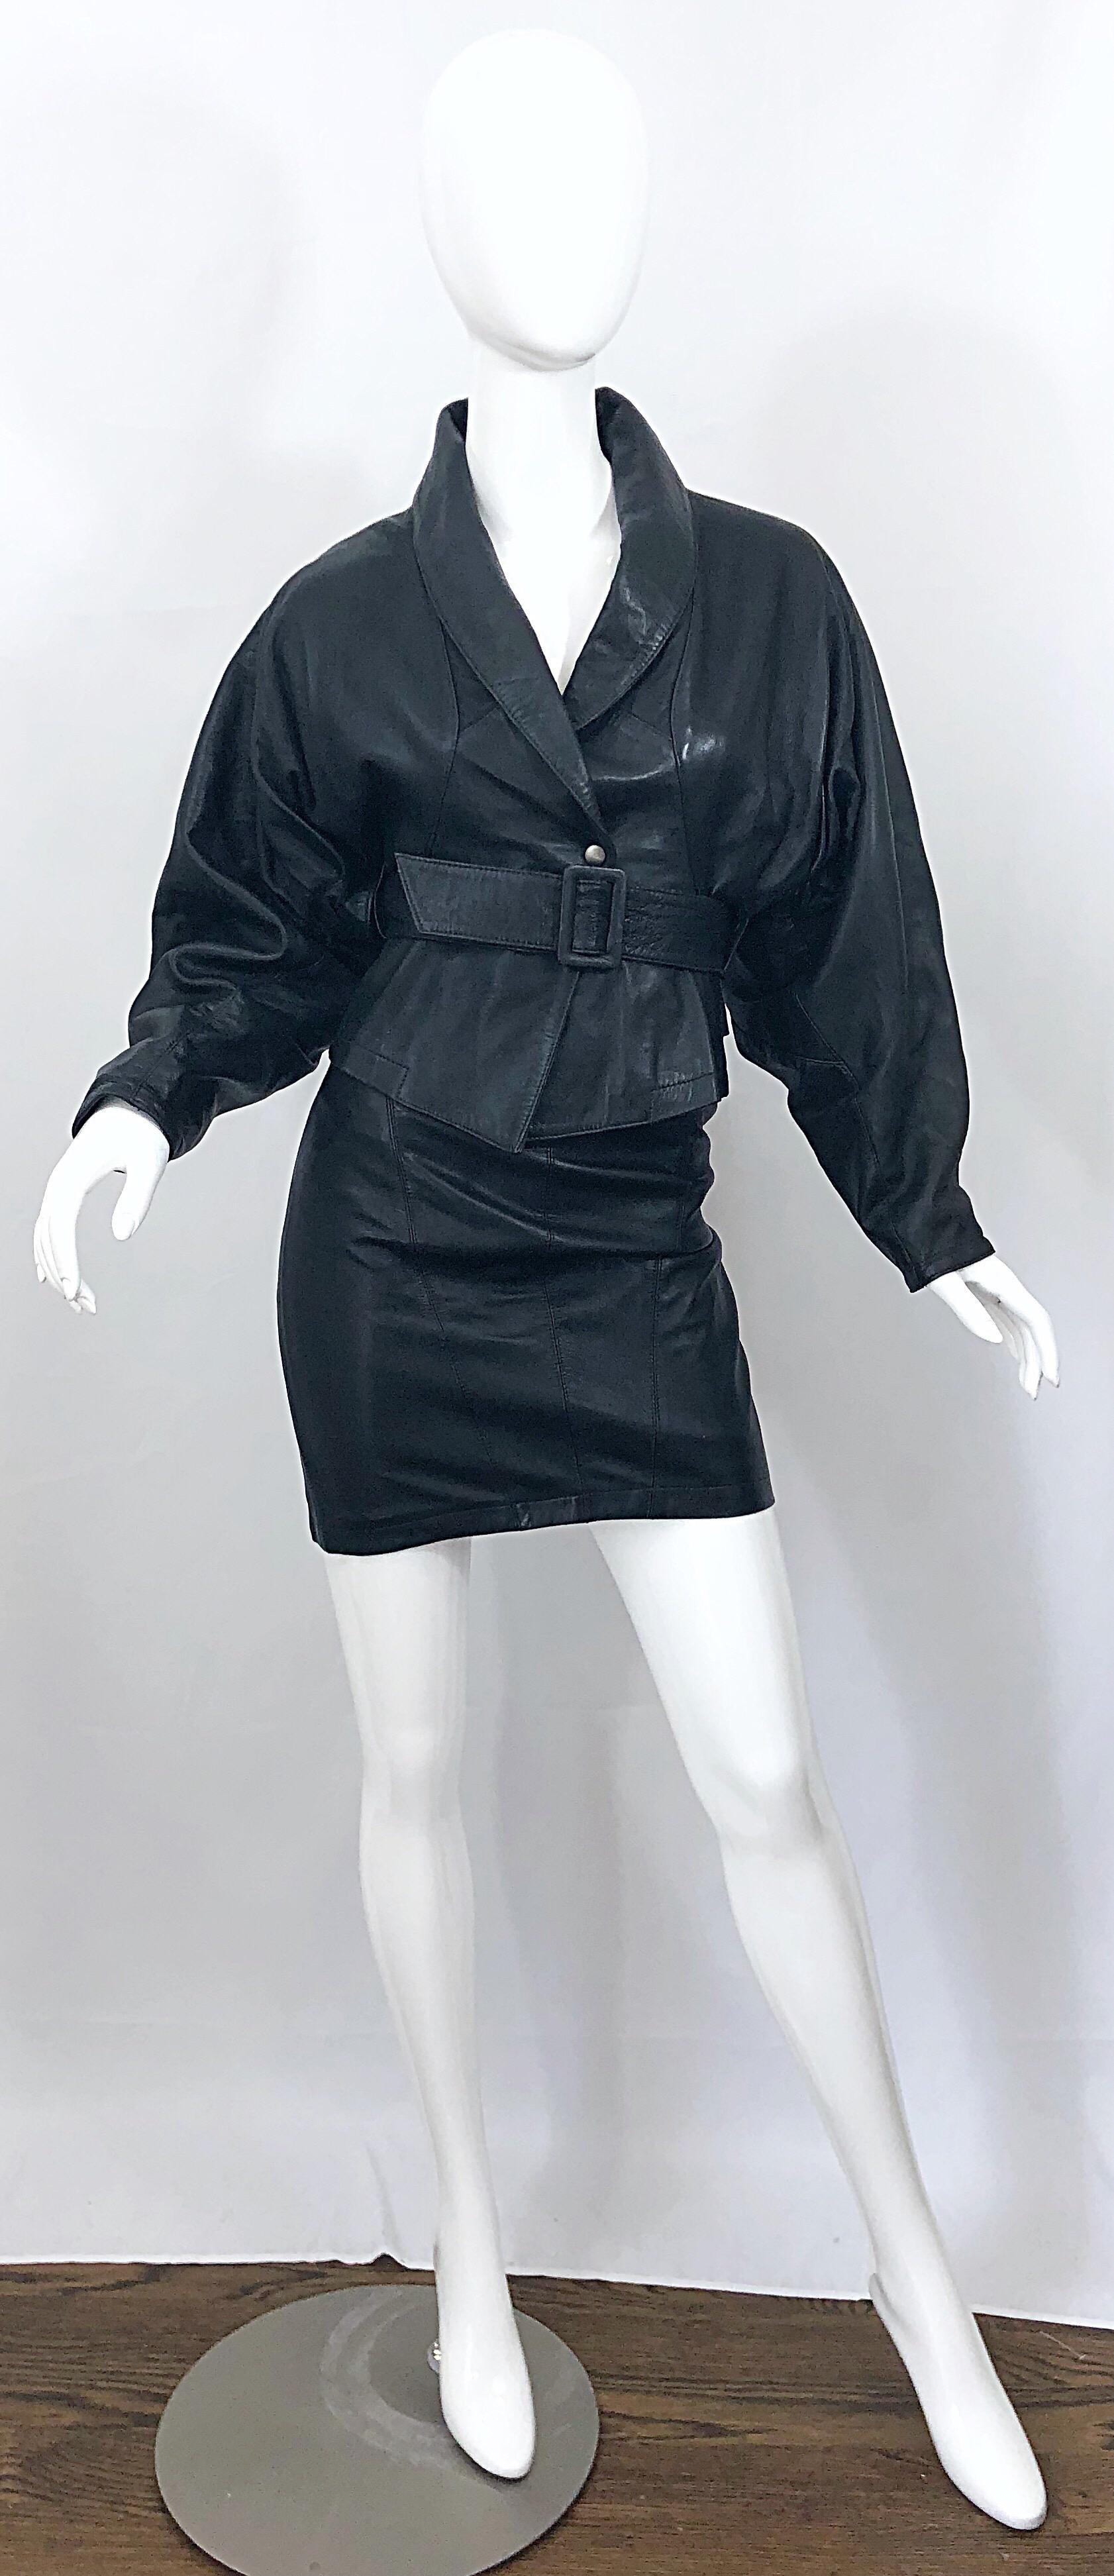 Avant Garde 1980s MARC LAURENT of Paris black leather jacket and mini skirt ensemble! Jacket features dolman sleeves with a clinched wasp waist. Detachable matching leather belt. Shawl collar can be worn down or flipped up. Features a hidden